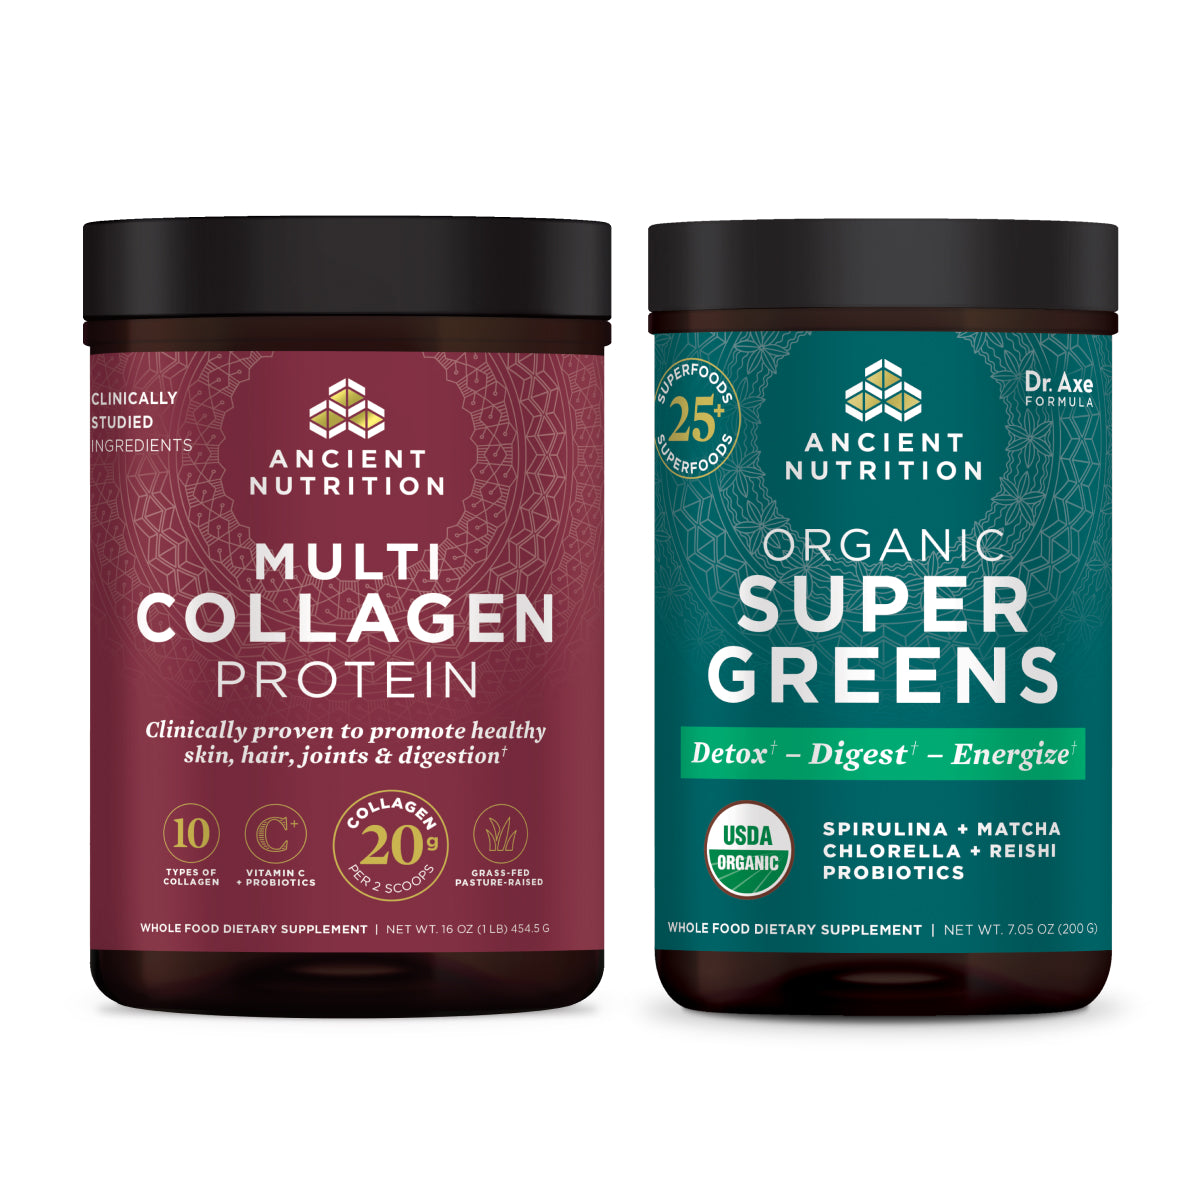 Bottle of Multi Collagen Protein Powder Pure and bottle of Organic SuperGreens powder side by side